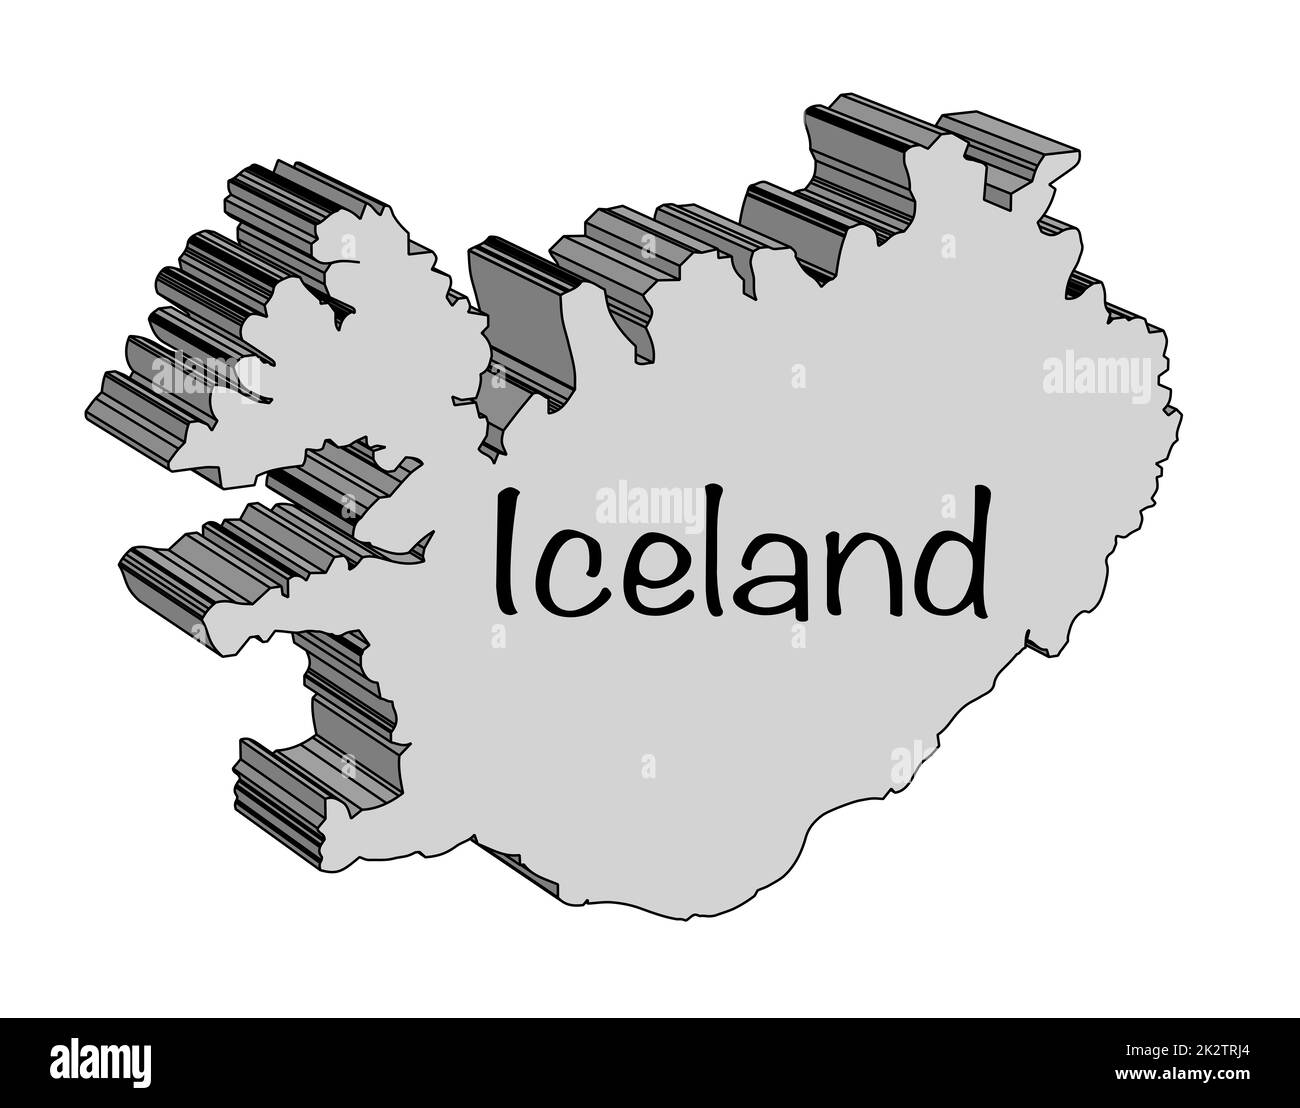 Iceland 3D Map Stock Photo